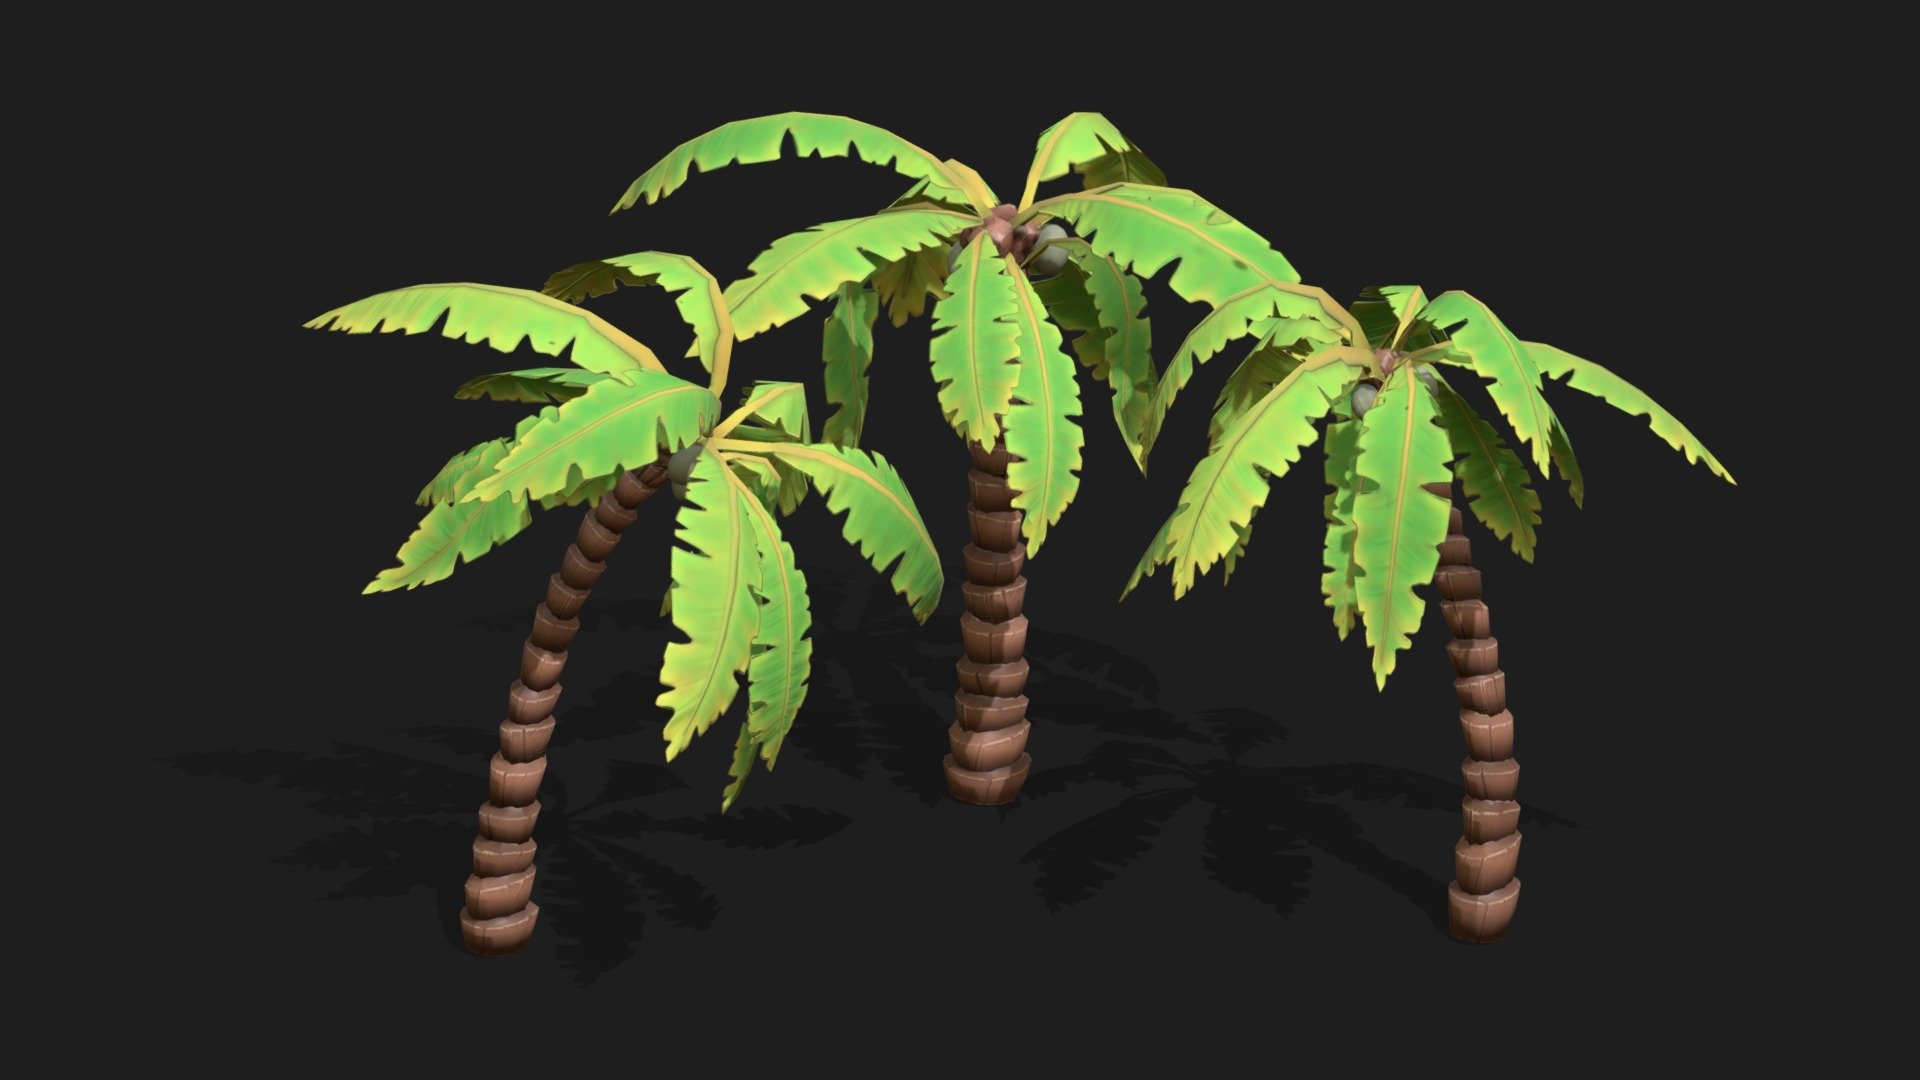 Originally modeled in Cinema 4D R 21



Maps for Cartoon Palm Tree




BaseColor

Metallic

Roughness

Normal

AO

Opacity



SCALE:
- Model at world center and real scale:
       Metric in centimeter
       1 unit = 1 centimeter



Texture resolution 2048x2048
Texture format PNG



Poly Count :
Polygon Count - 2099
Vertex Count - 3174
No N-Gons - Cartoon Palm Tree - Buy Royalty Free 3D model by zames1992 3d model